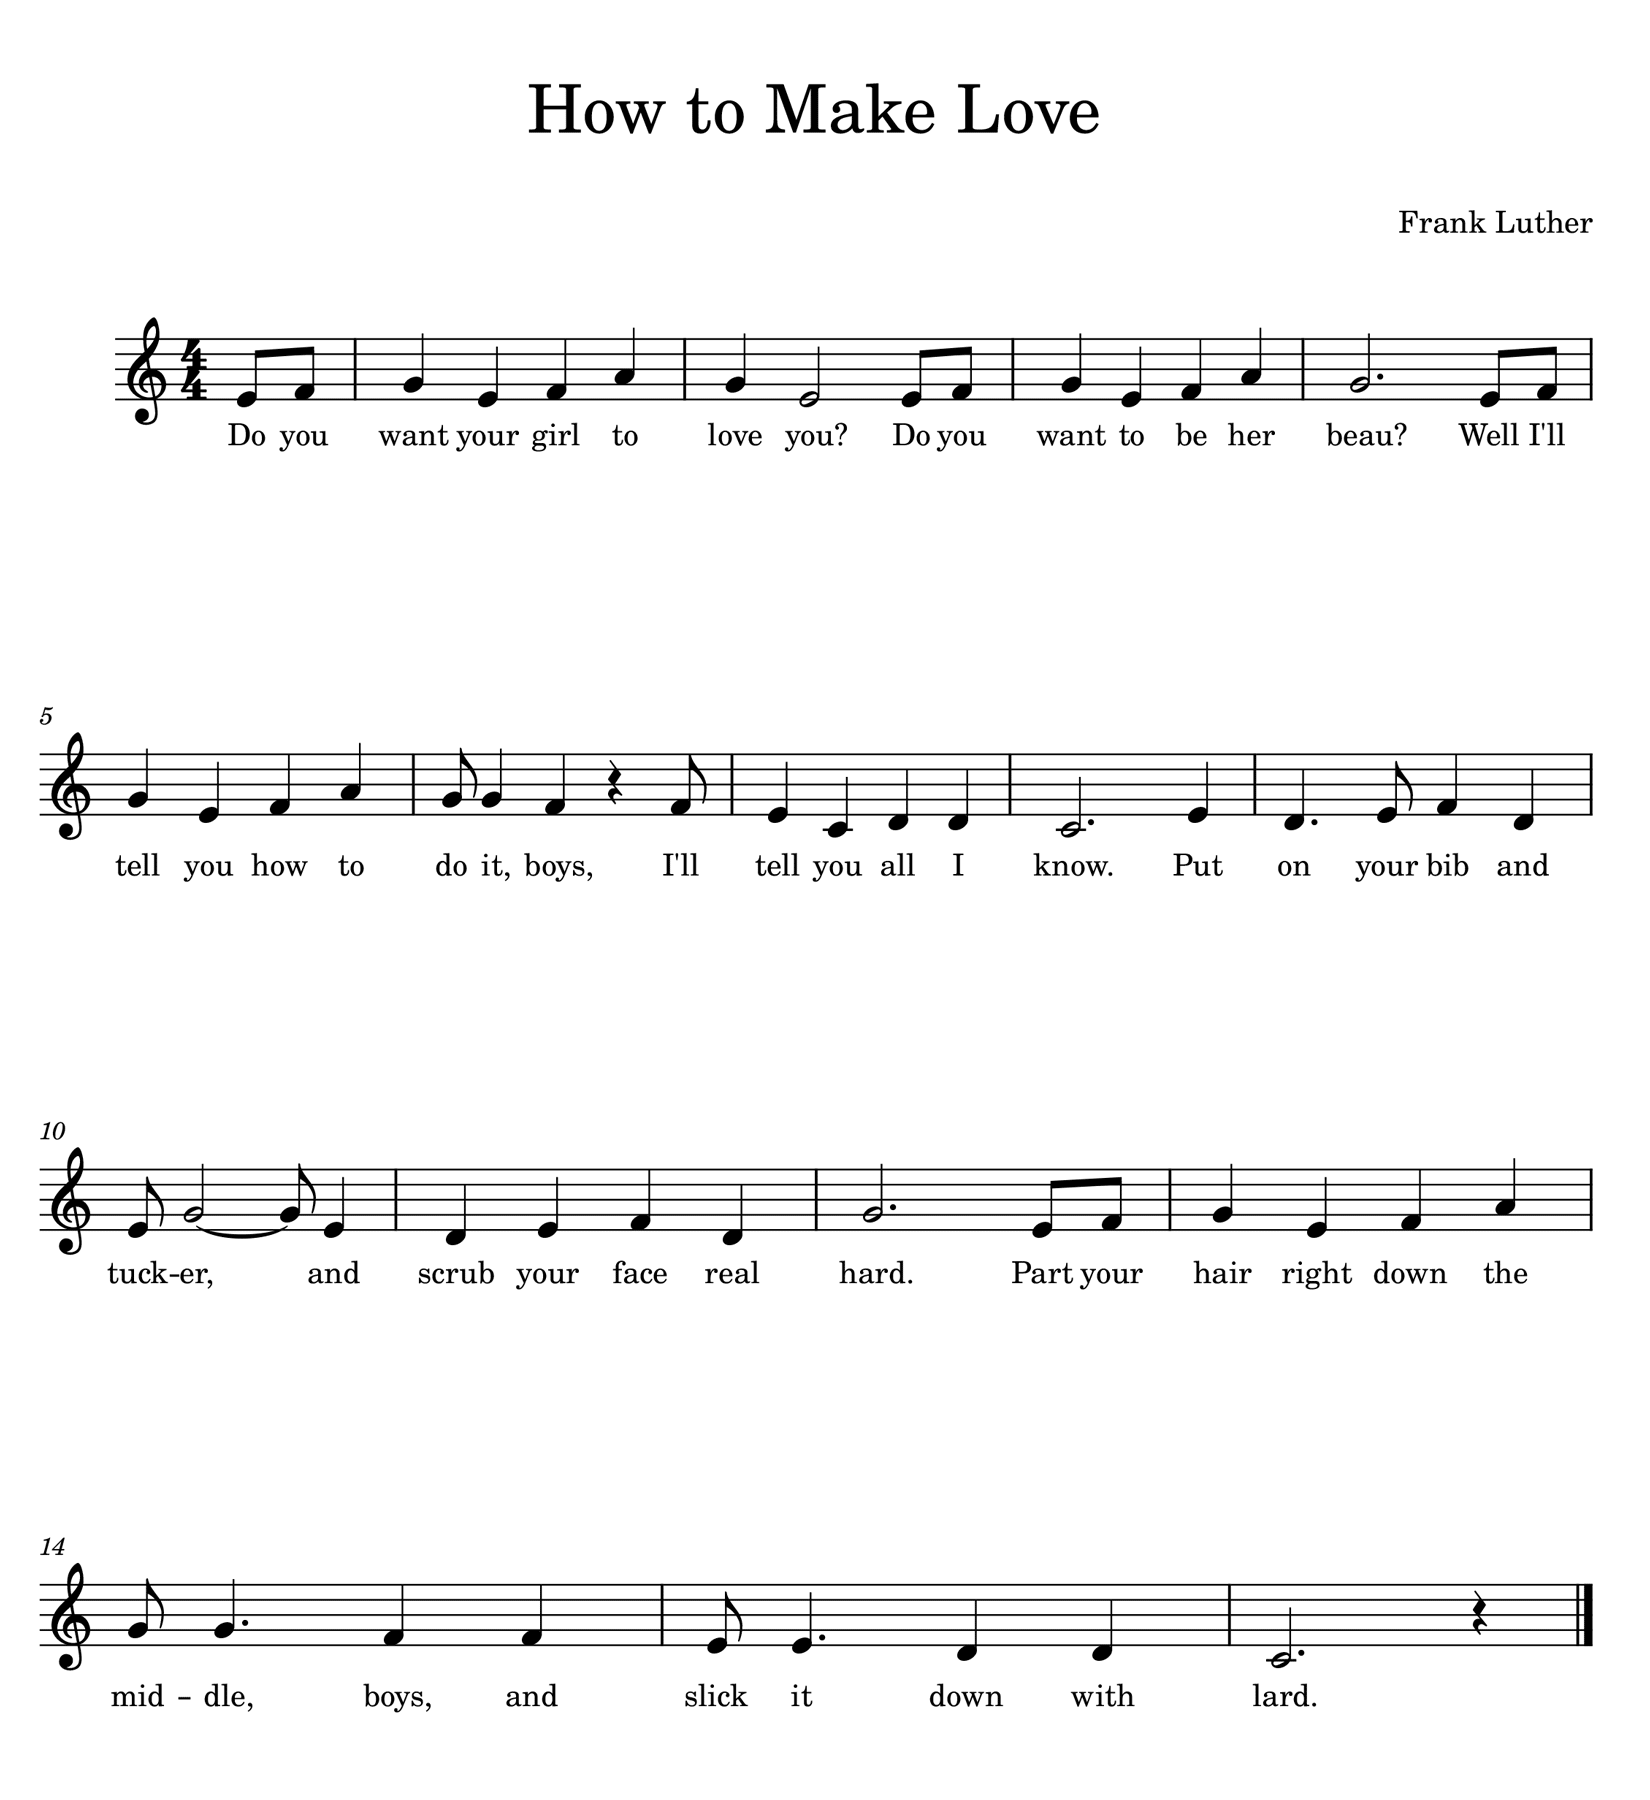 Sheet music for "How to Make Love"